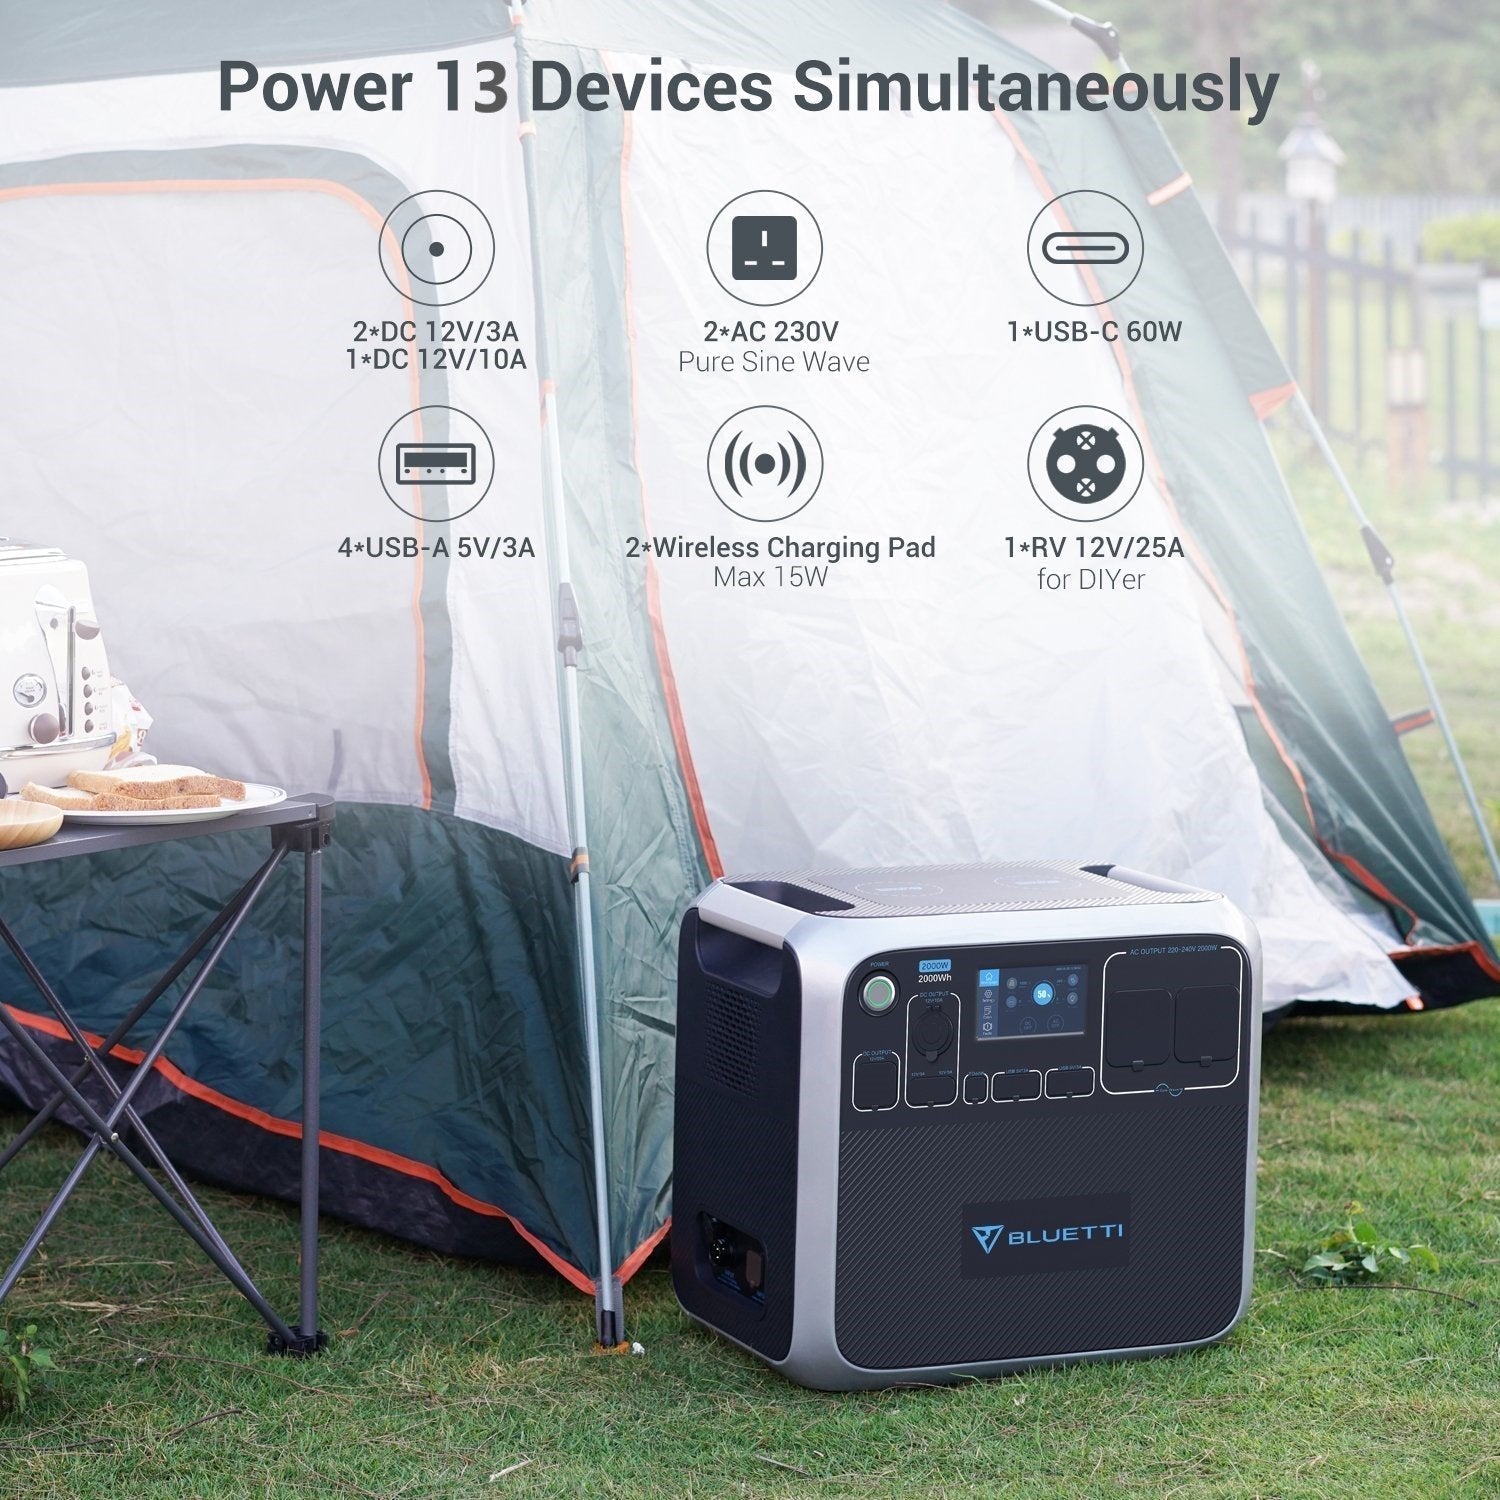 BLUETTI AC200P Portable Power Station, 2000Wh LiFePO4 Battery Backup w/ 6  2000W AC Outlets (4800W Peak), Solar Generator for Outdoor Camping, RV